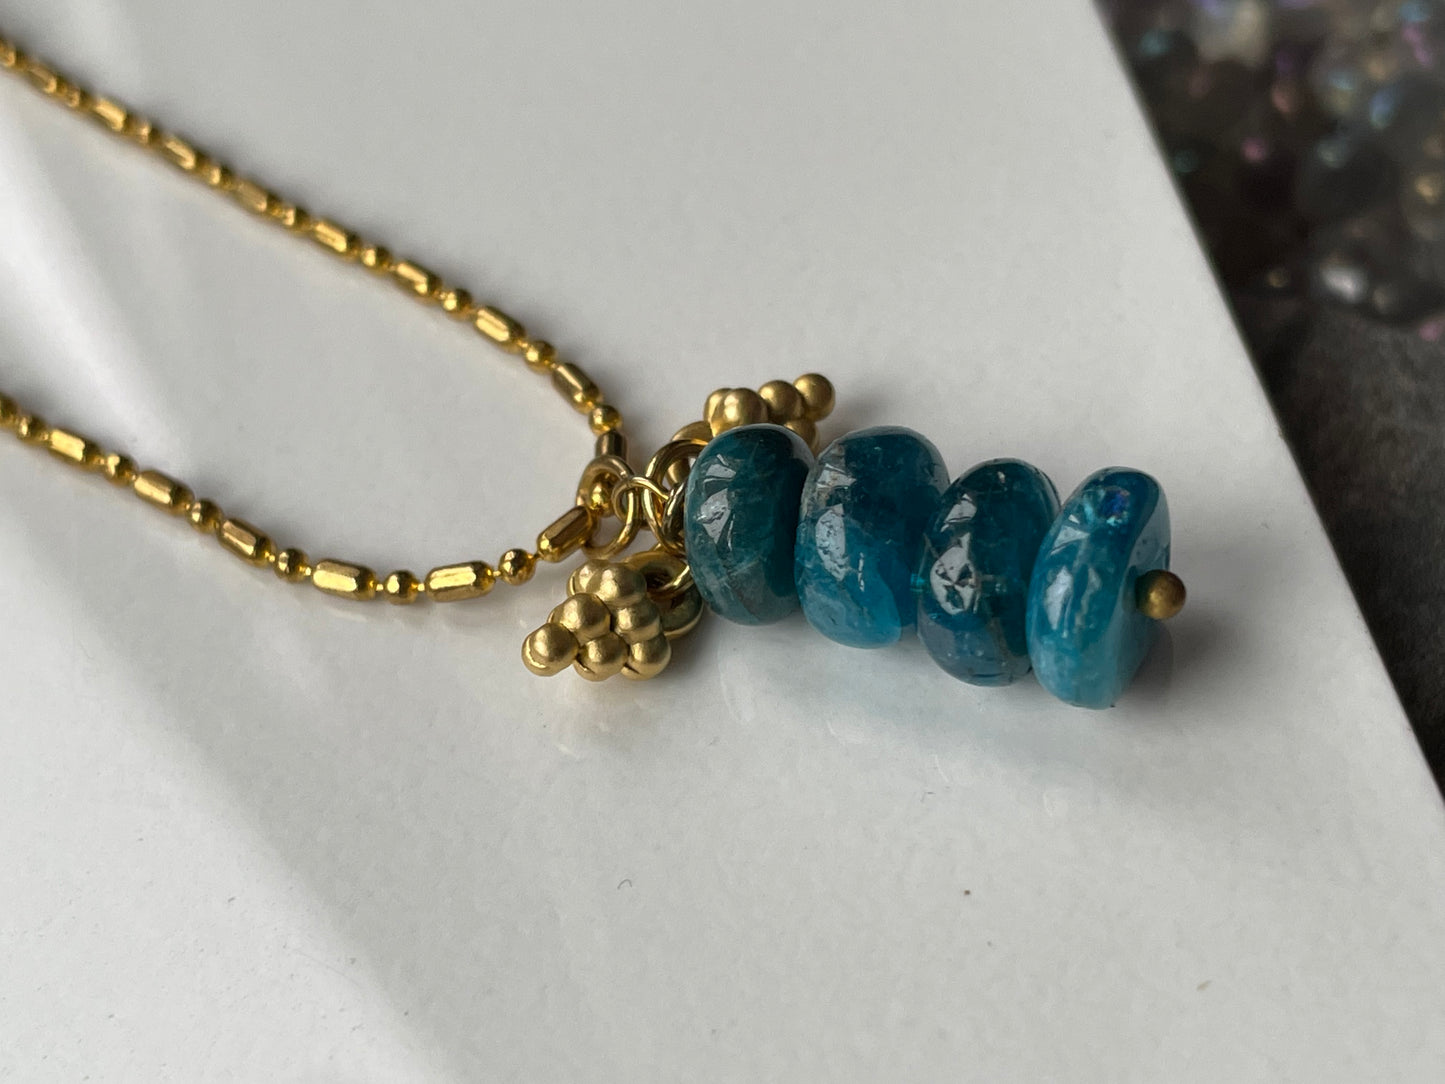 Neon Apatite Crystal Gemstone Gold Necklace - Grapes